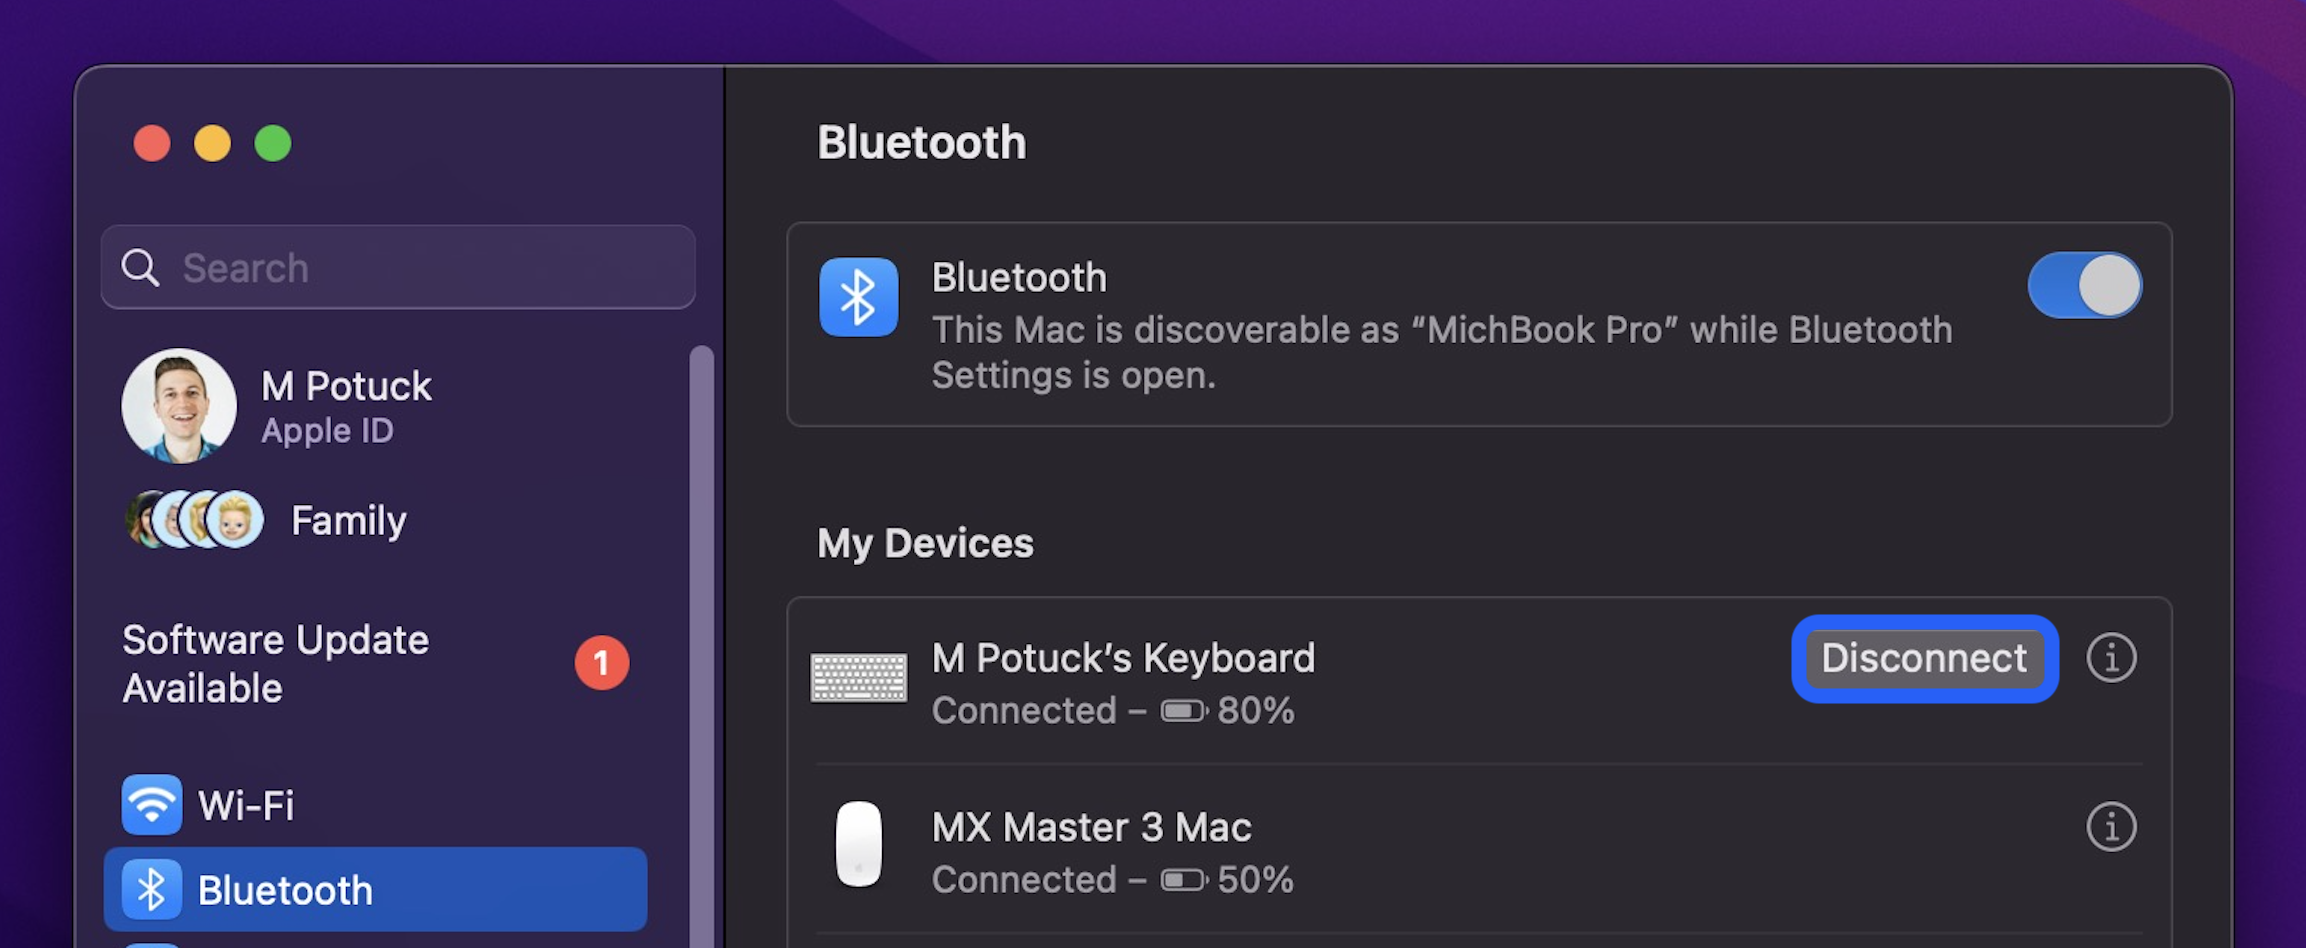 Bluetooth Archives - 9to5Mac